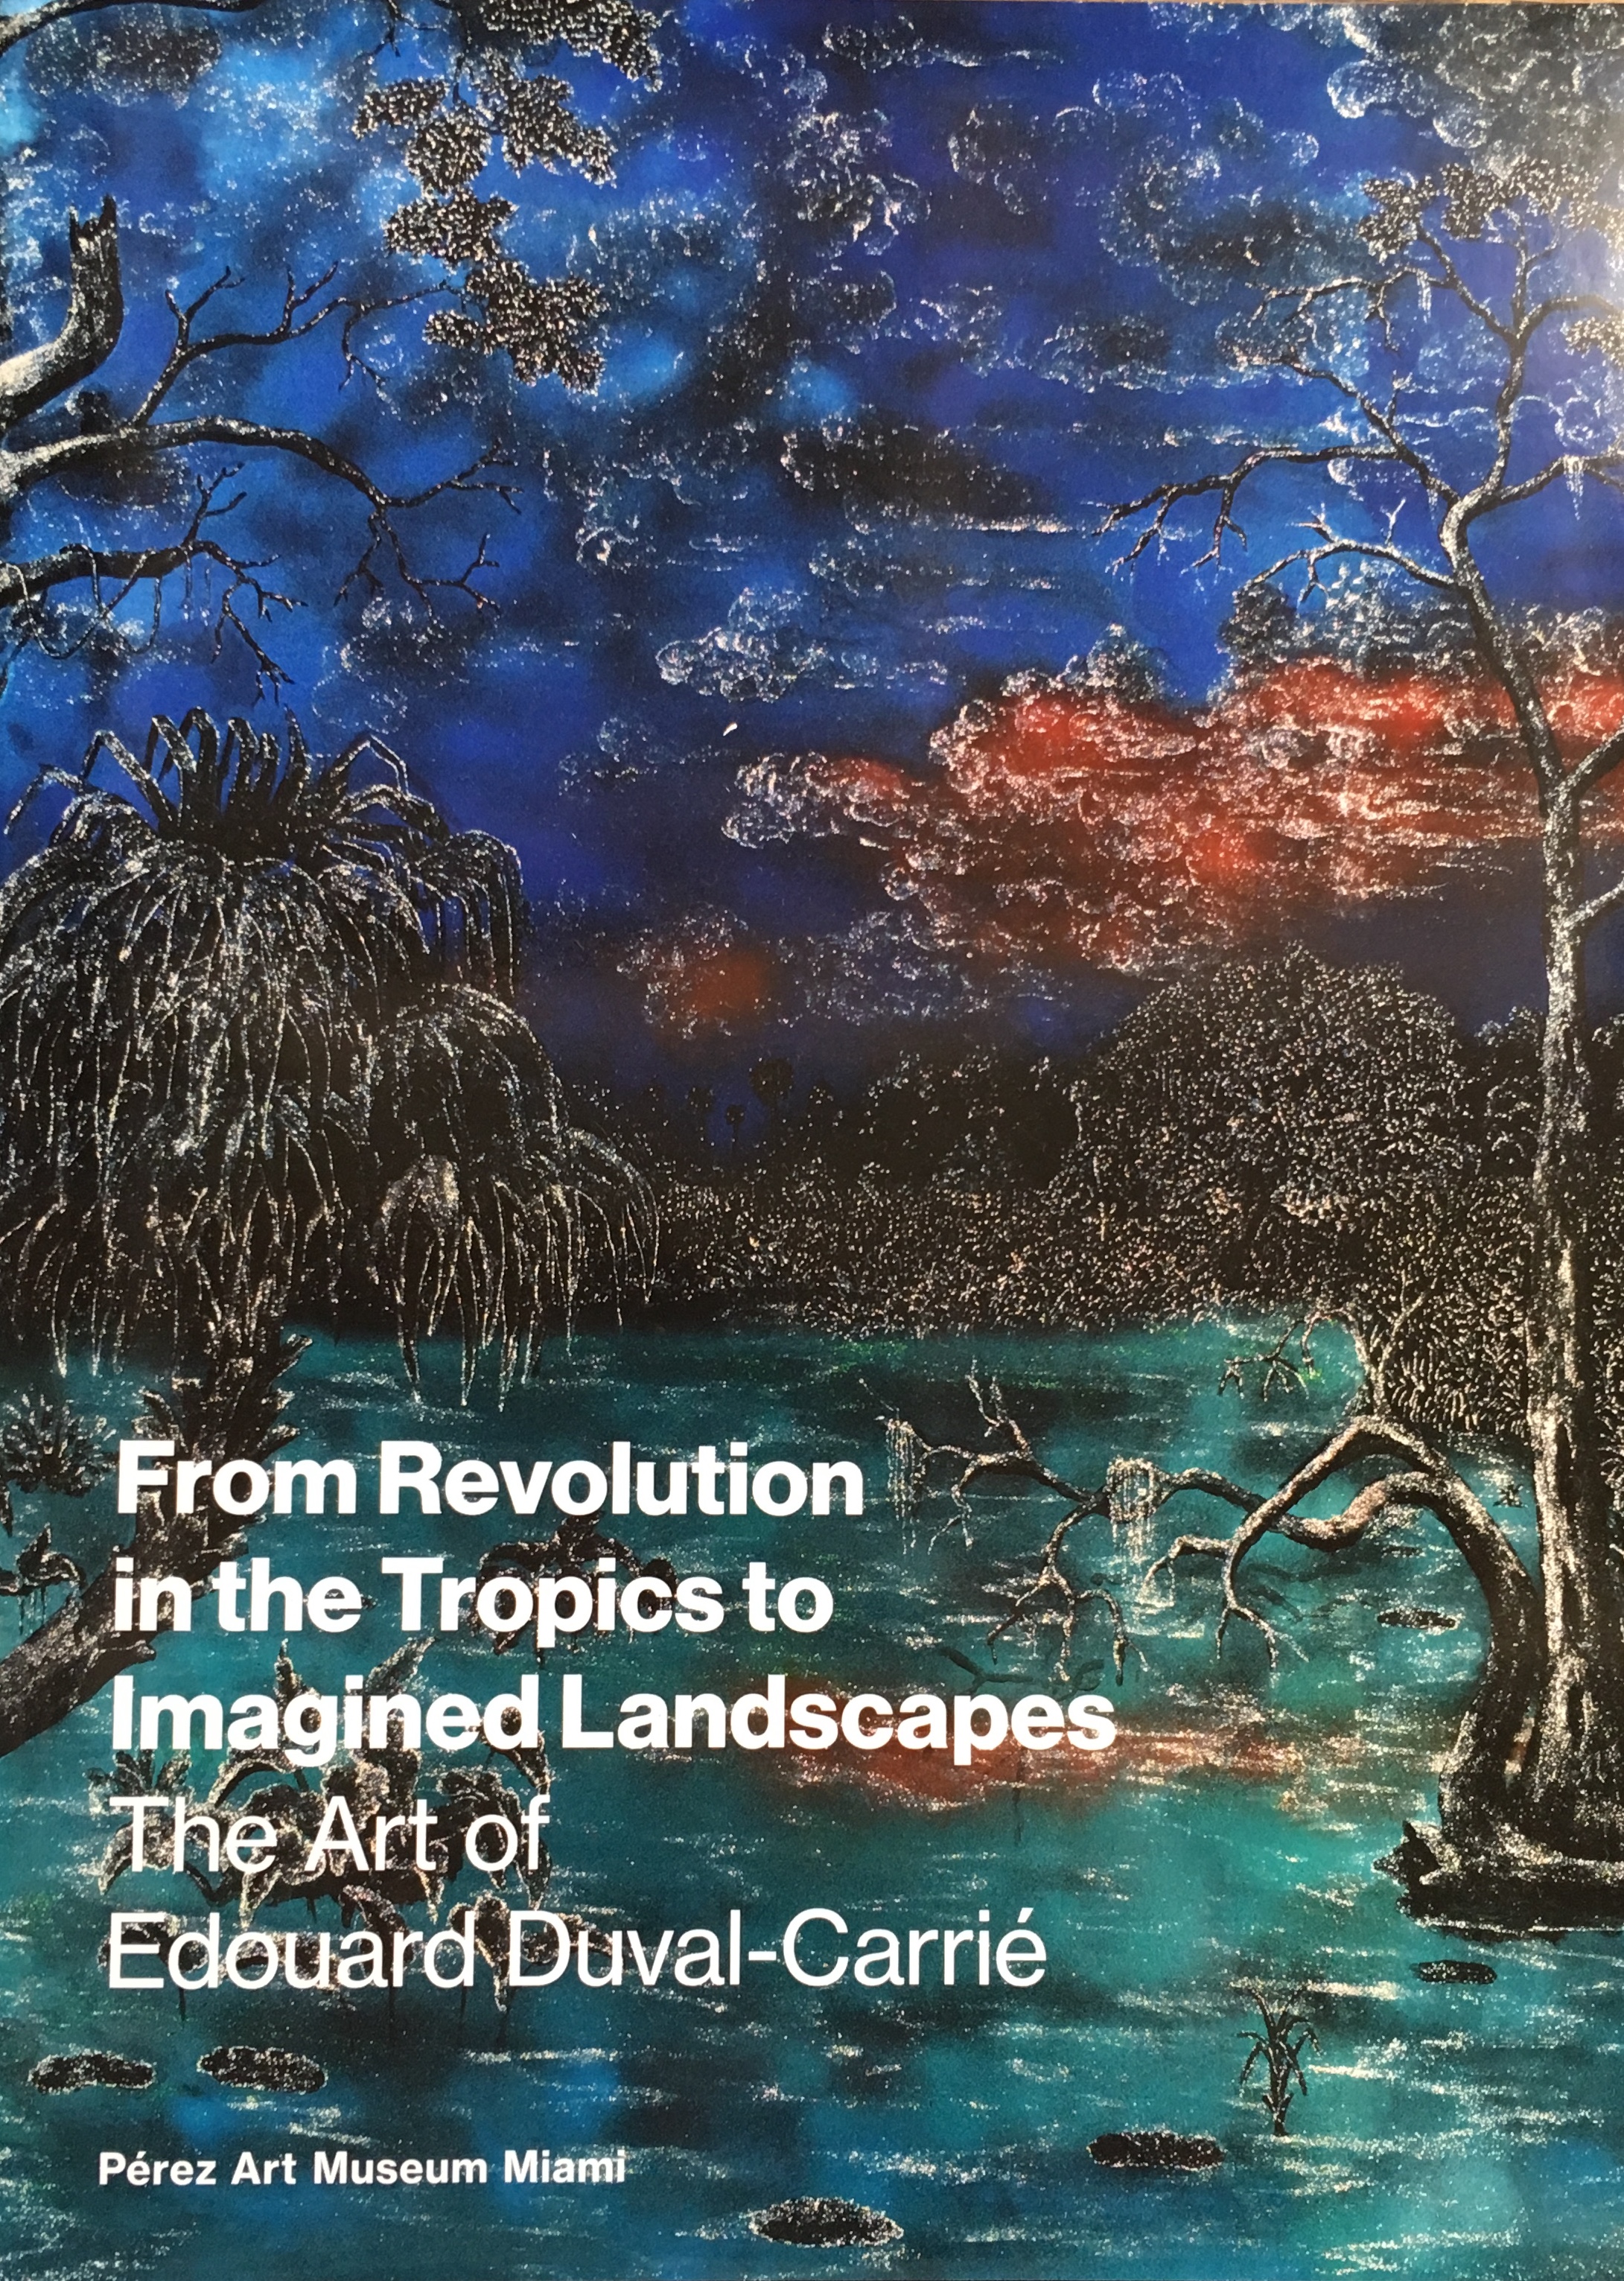 From Revolution in the Tropics to Imagined Landscapes The Art by Edouard Duval-Carrié